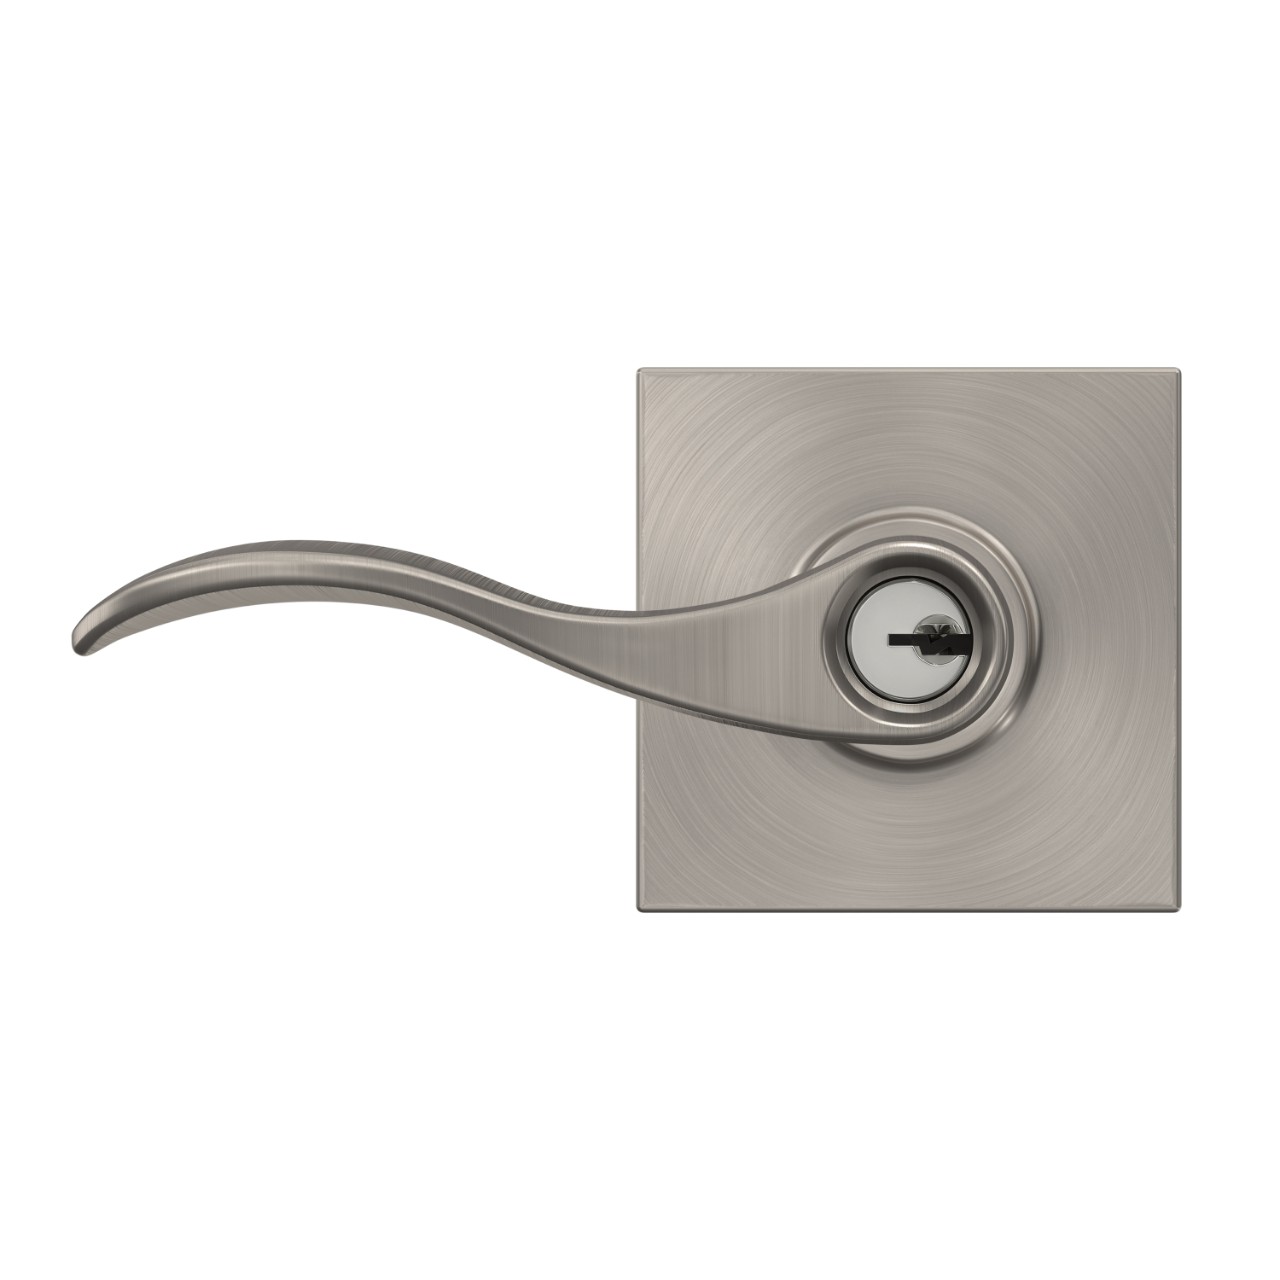 Accent lever Keyed Entry lock